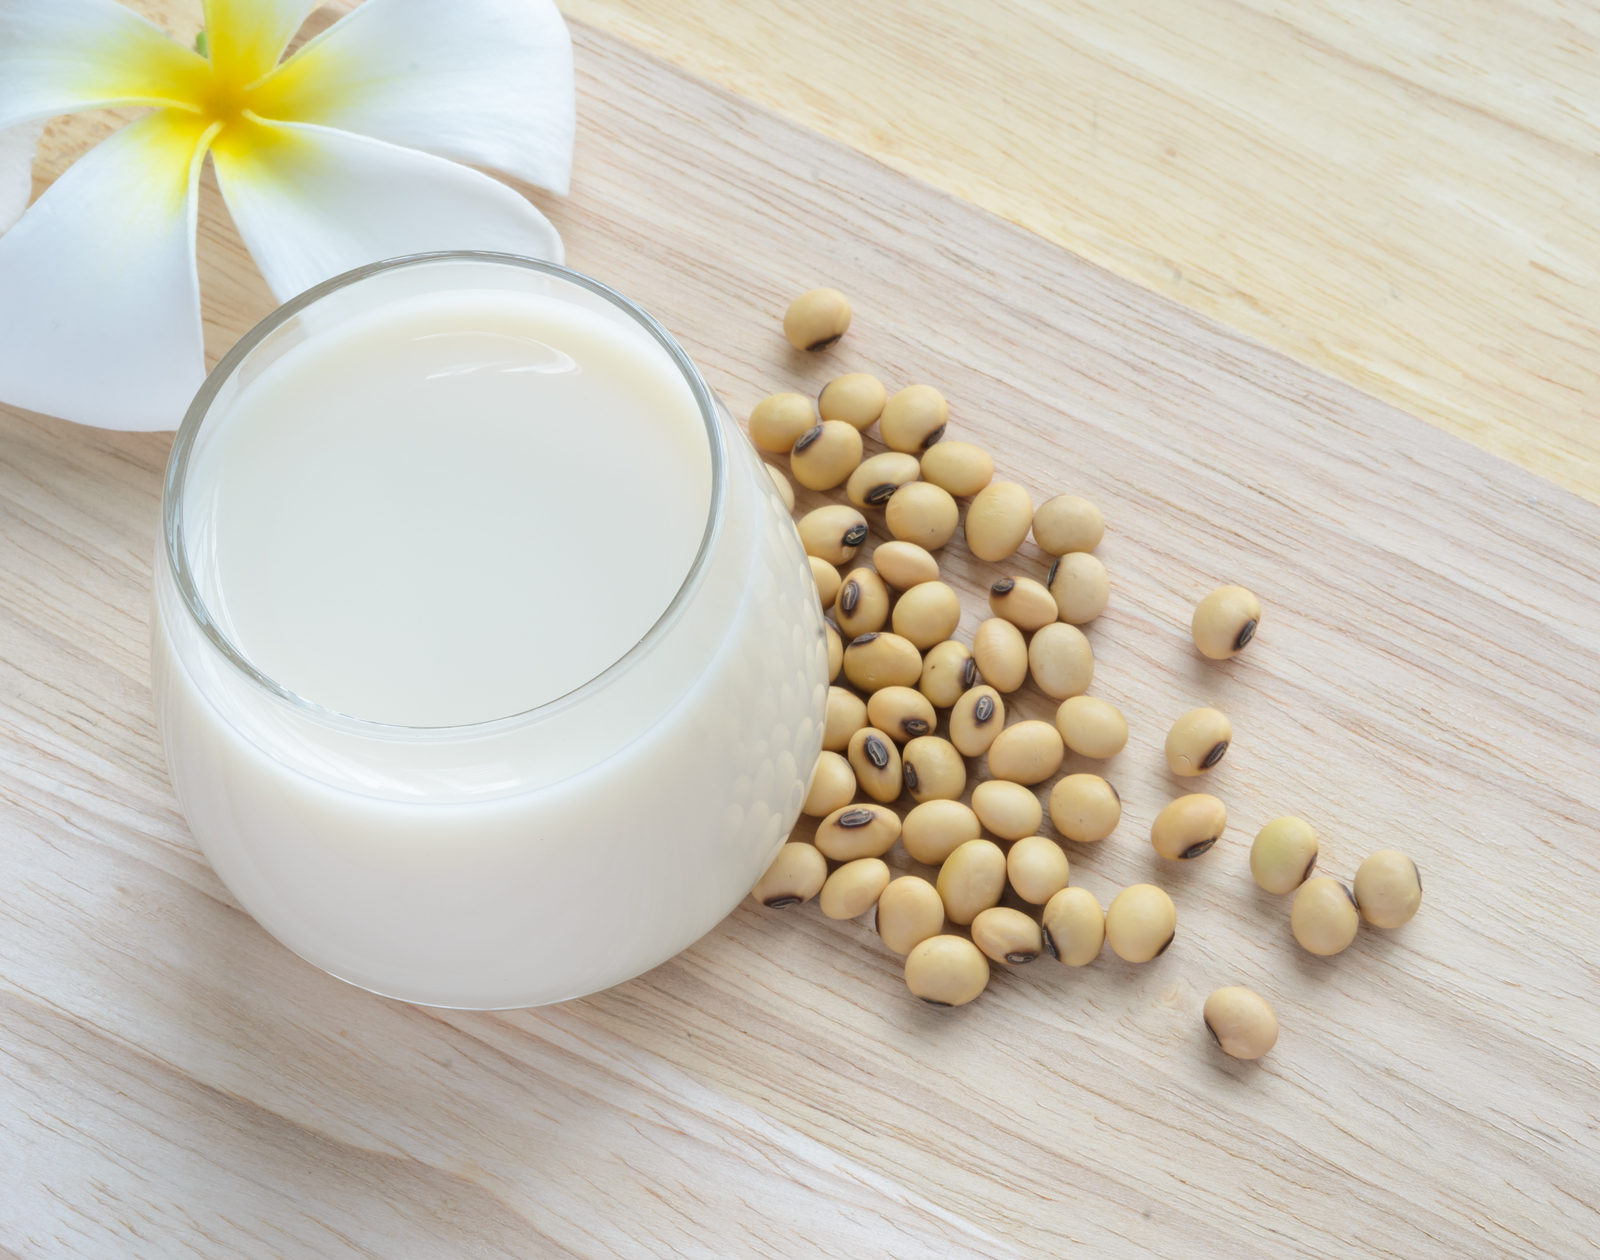 Fresh Soy Milk In A Glass And Soybean Seeds